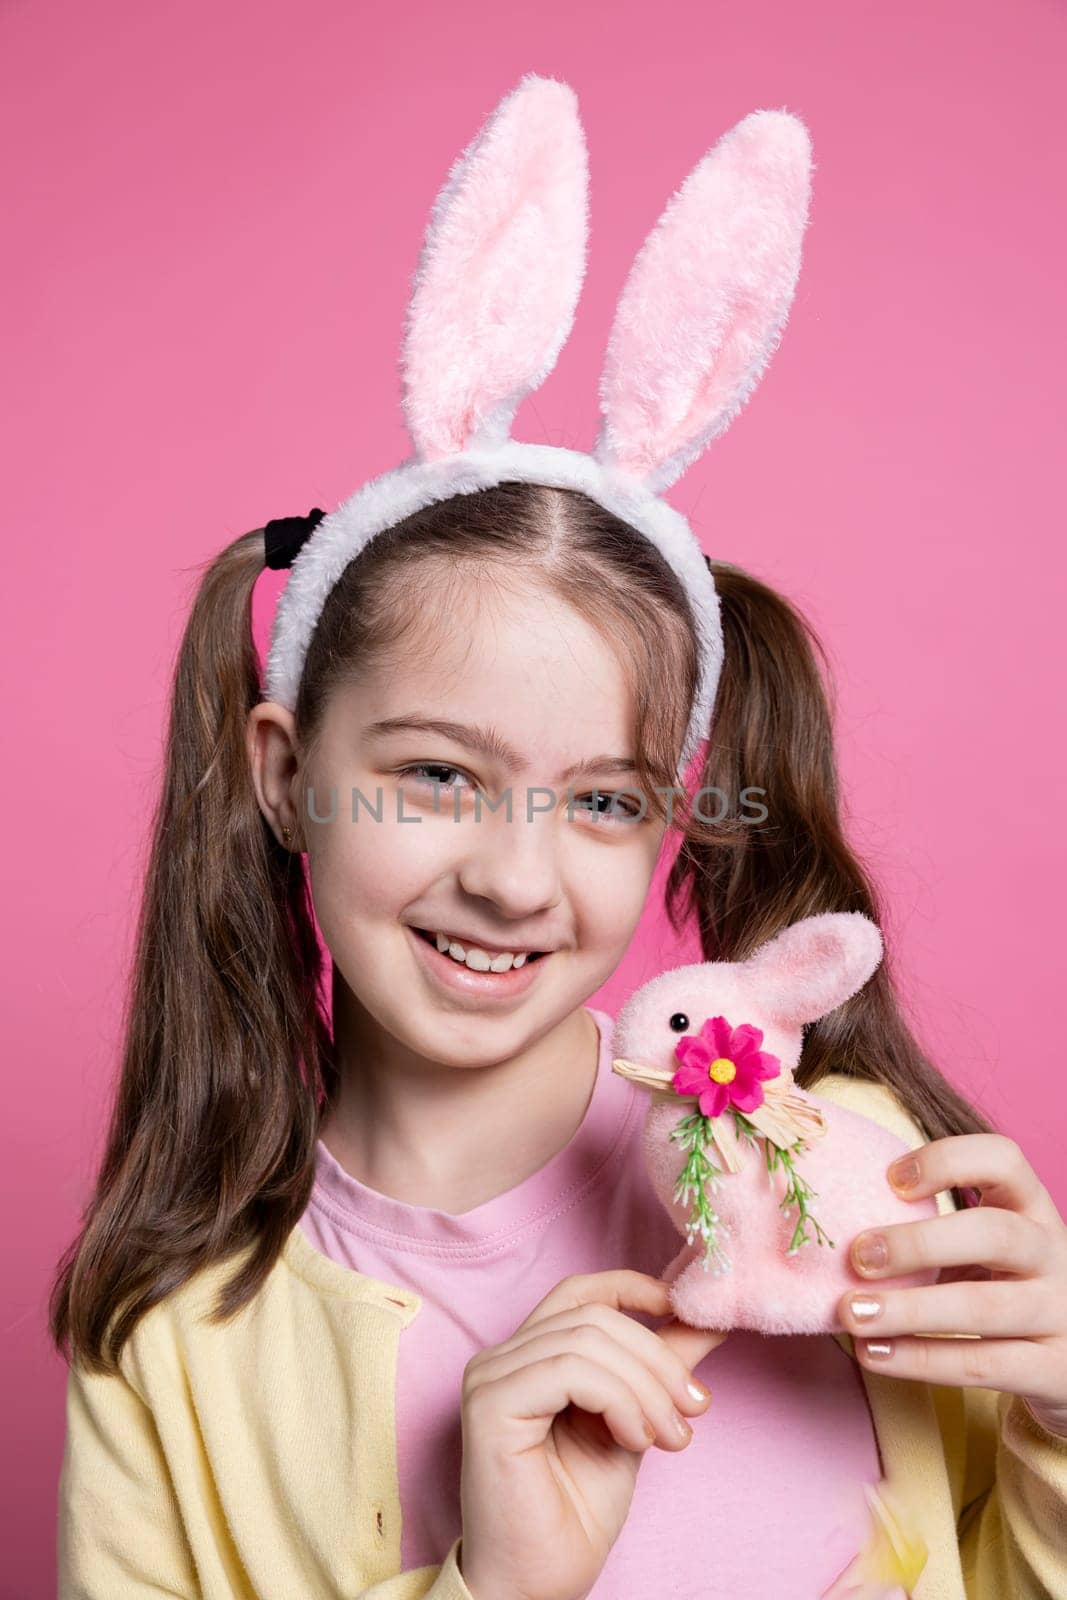 Joyful pretty toddler with bunny ears and pigtails holding a pink rabbit toy, posing with confidence over pink background. Young girl feeling optimistic about easter celebration, colorful decor.